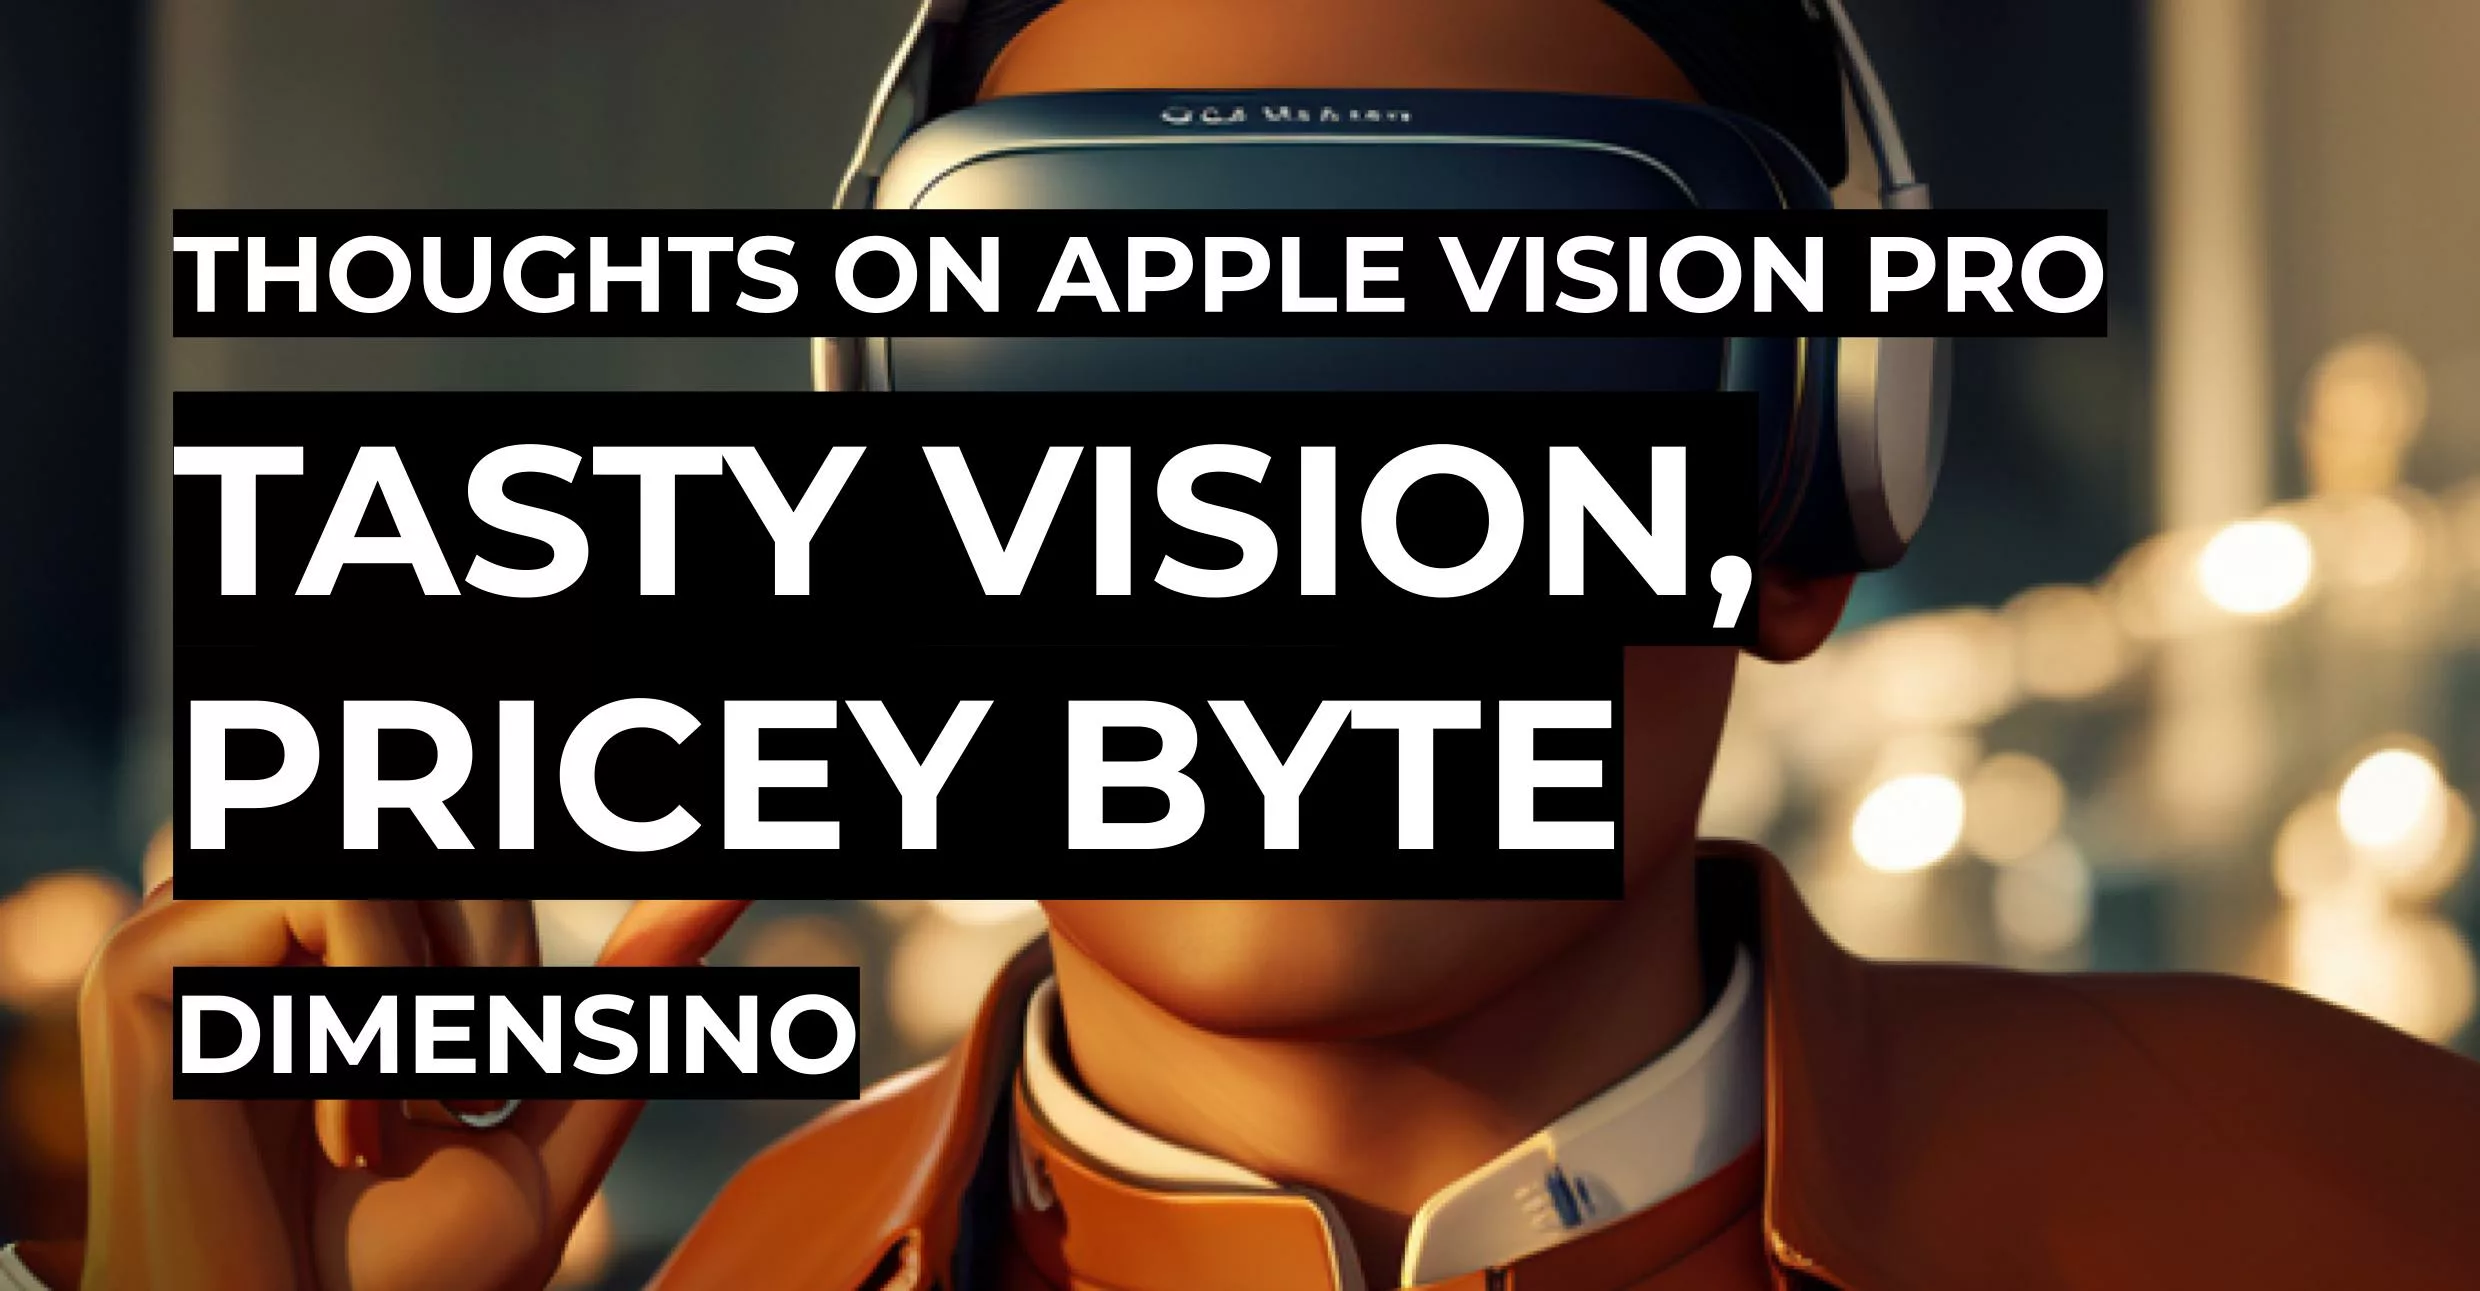 Tasty Vision, Pricey Byte | Thoughts on Apple Vision Pro